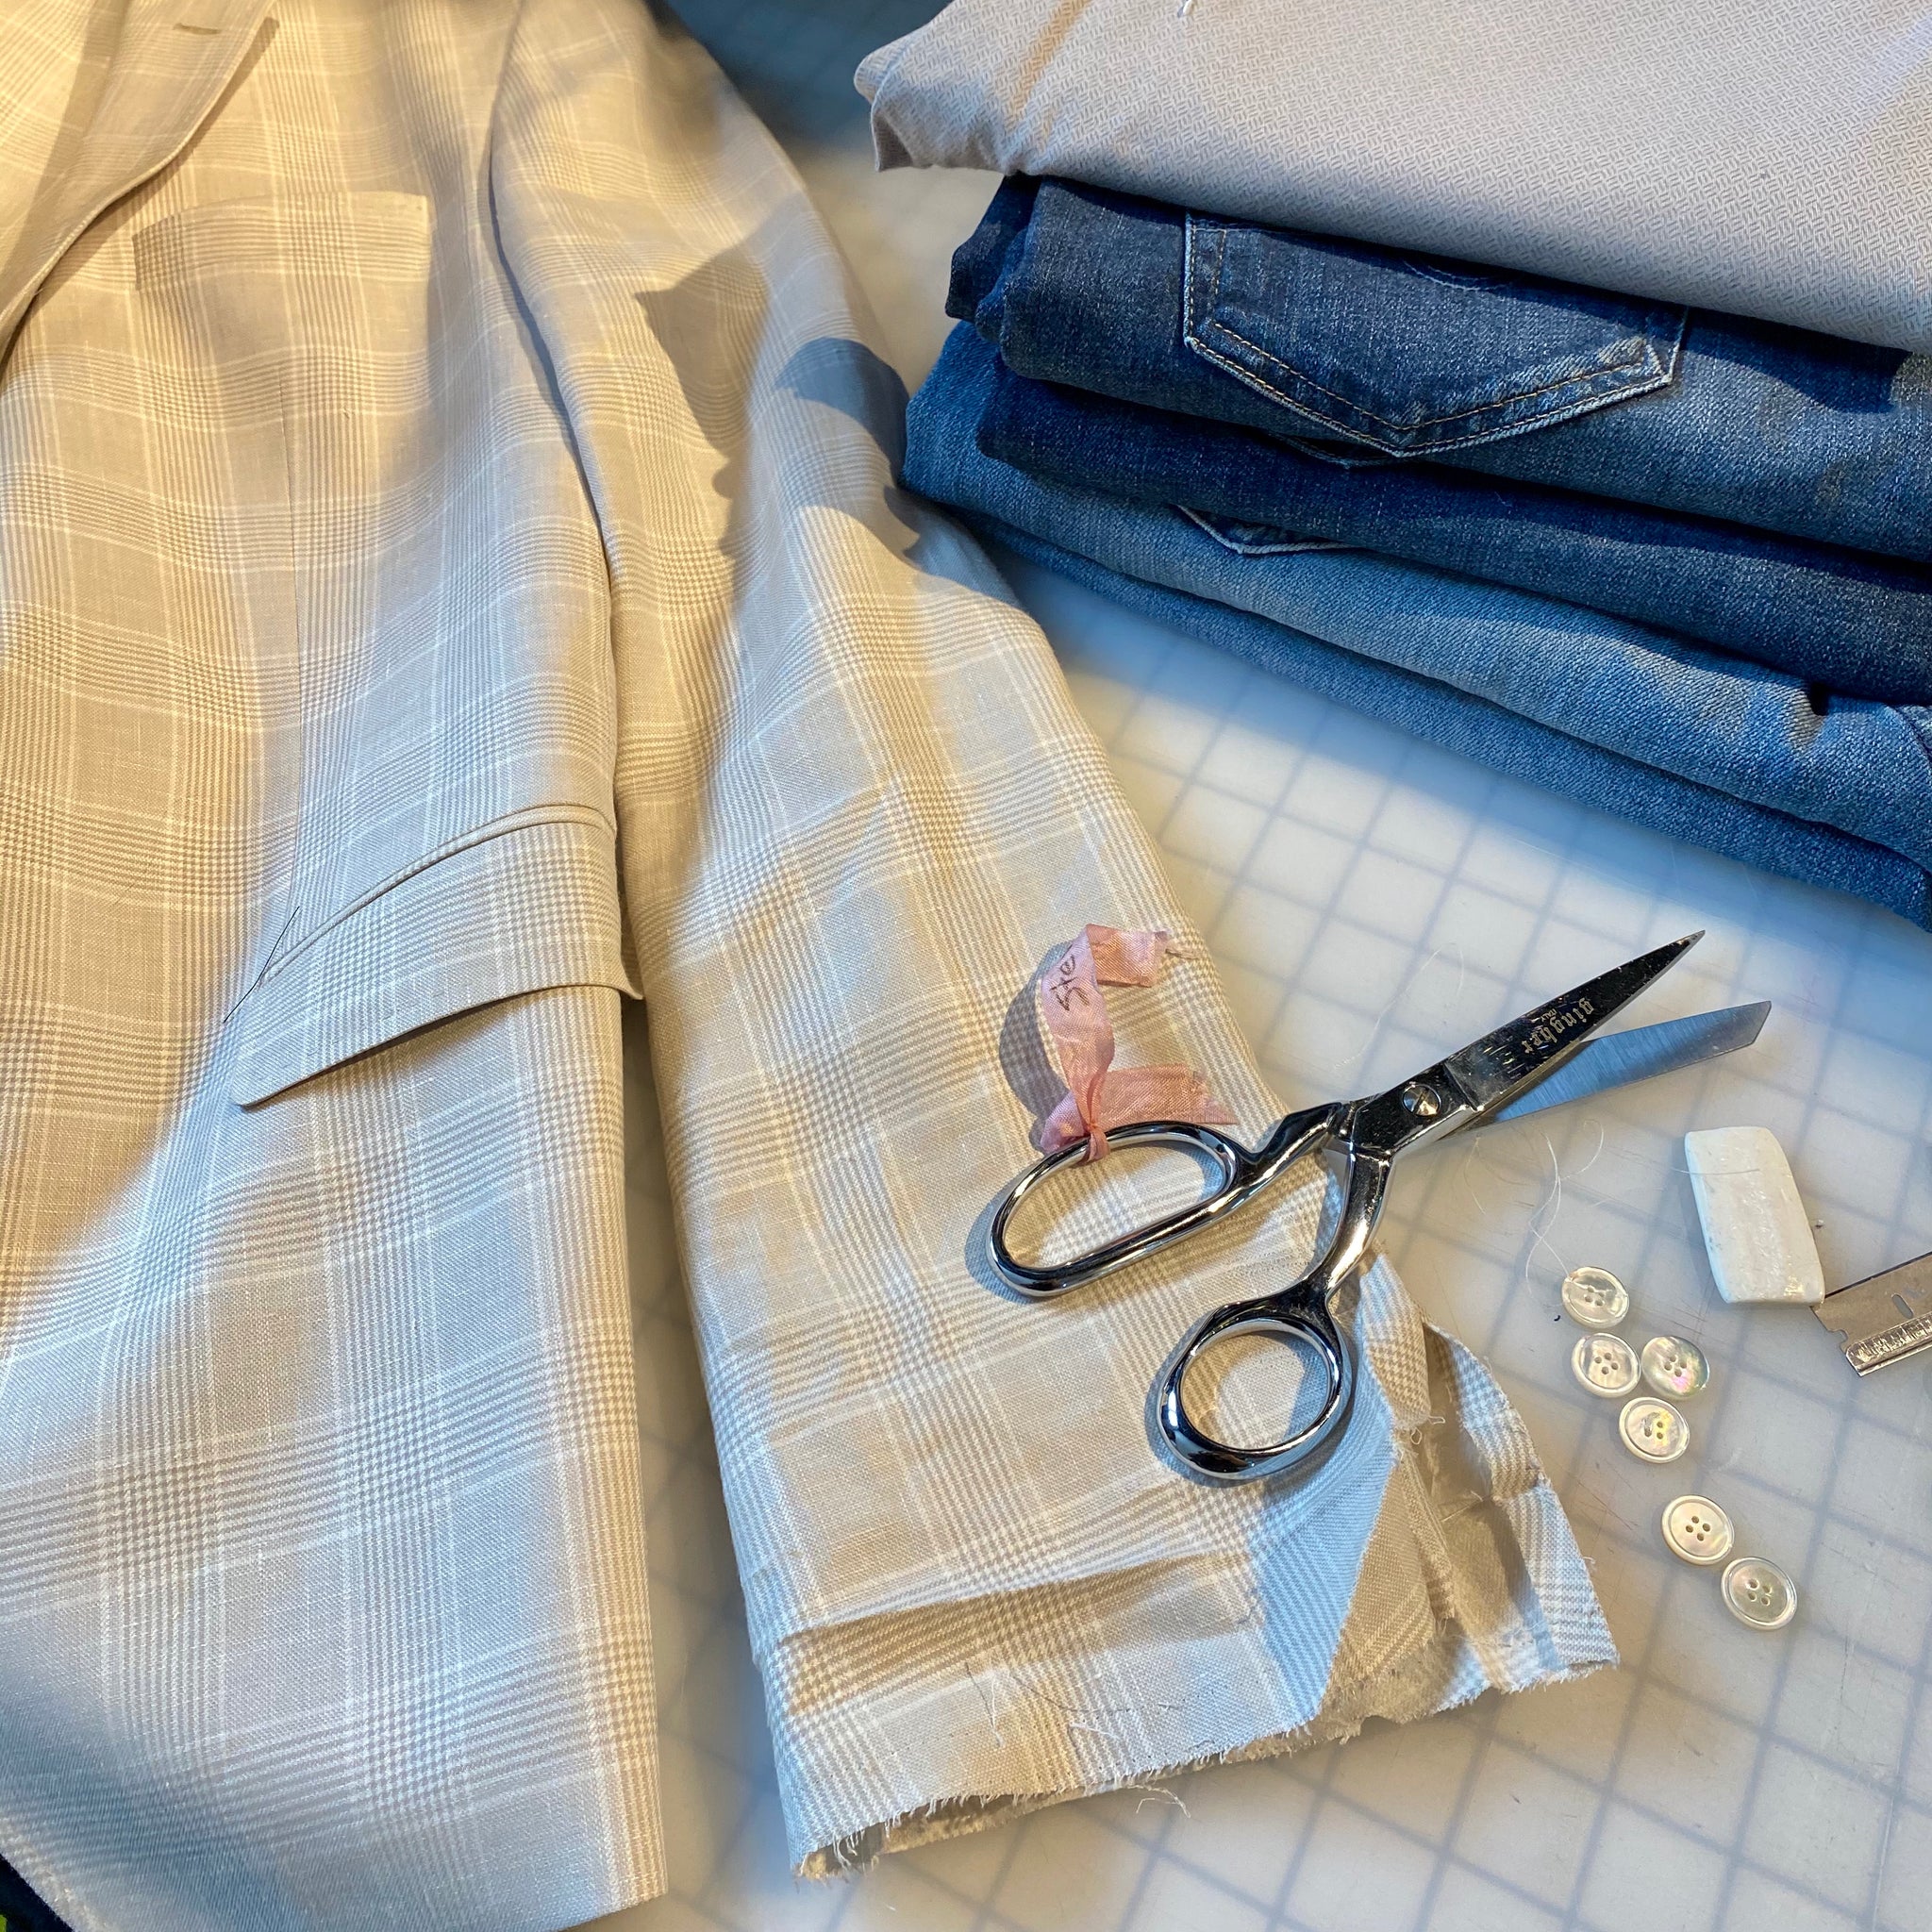 Looking for a new tailor? We got you!